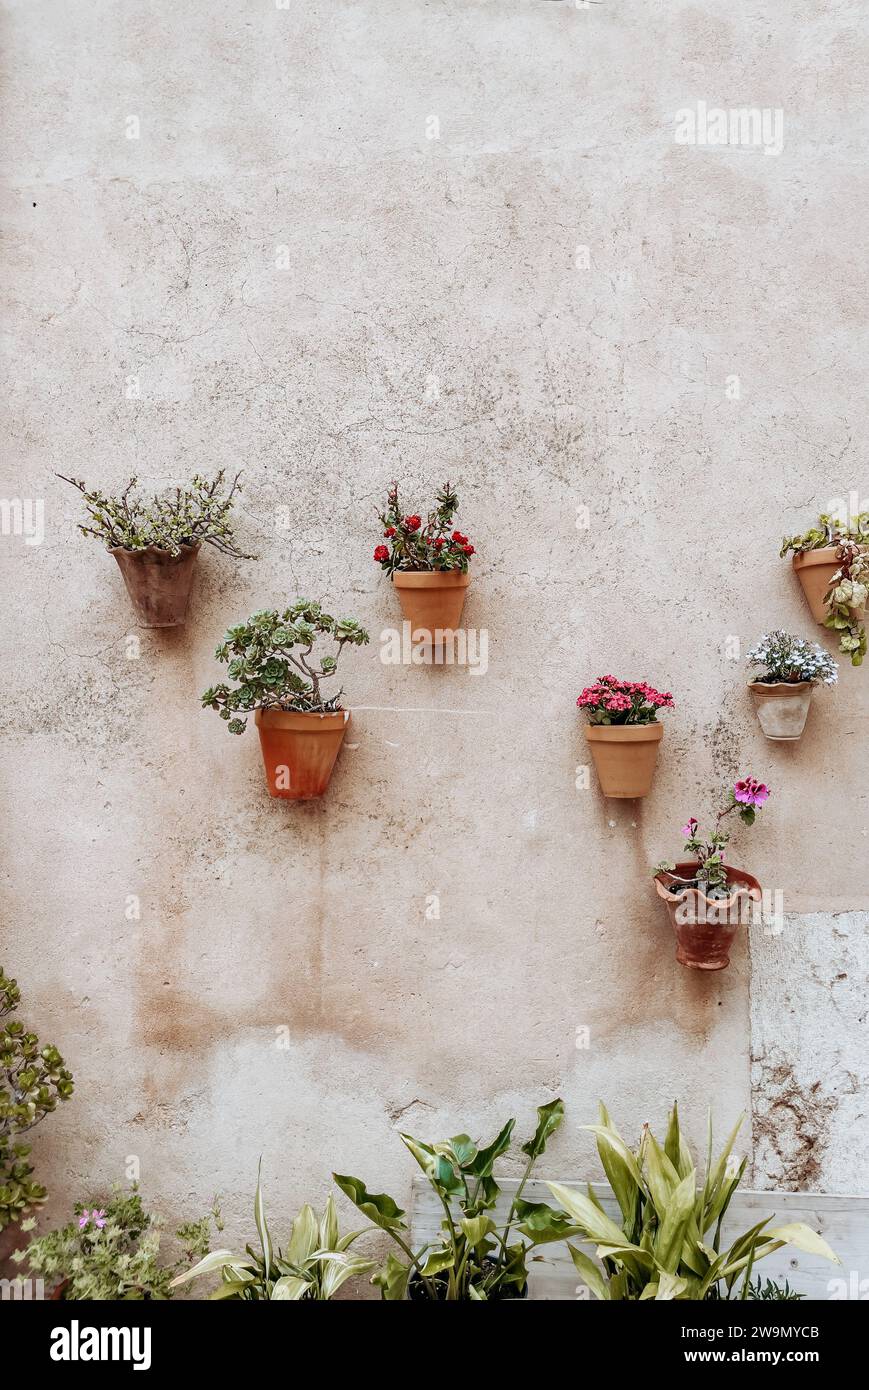 Flower pots hanging on a wall in Valldemossa, Majorca, Spain Stock Photo